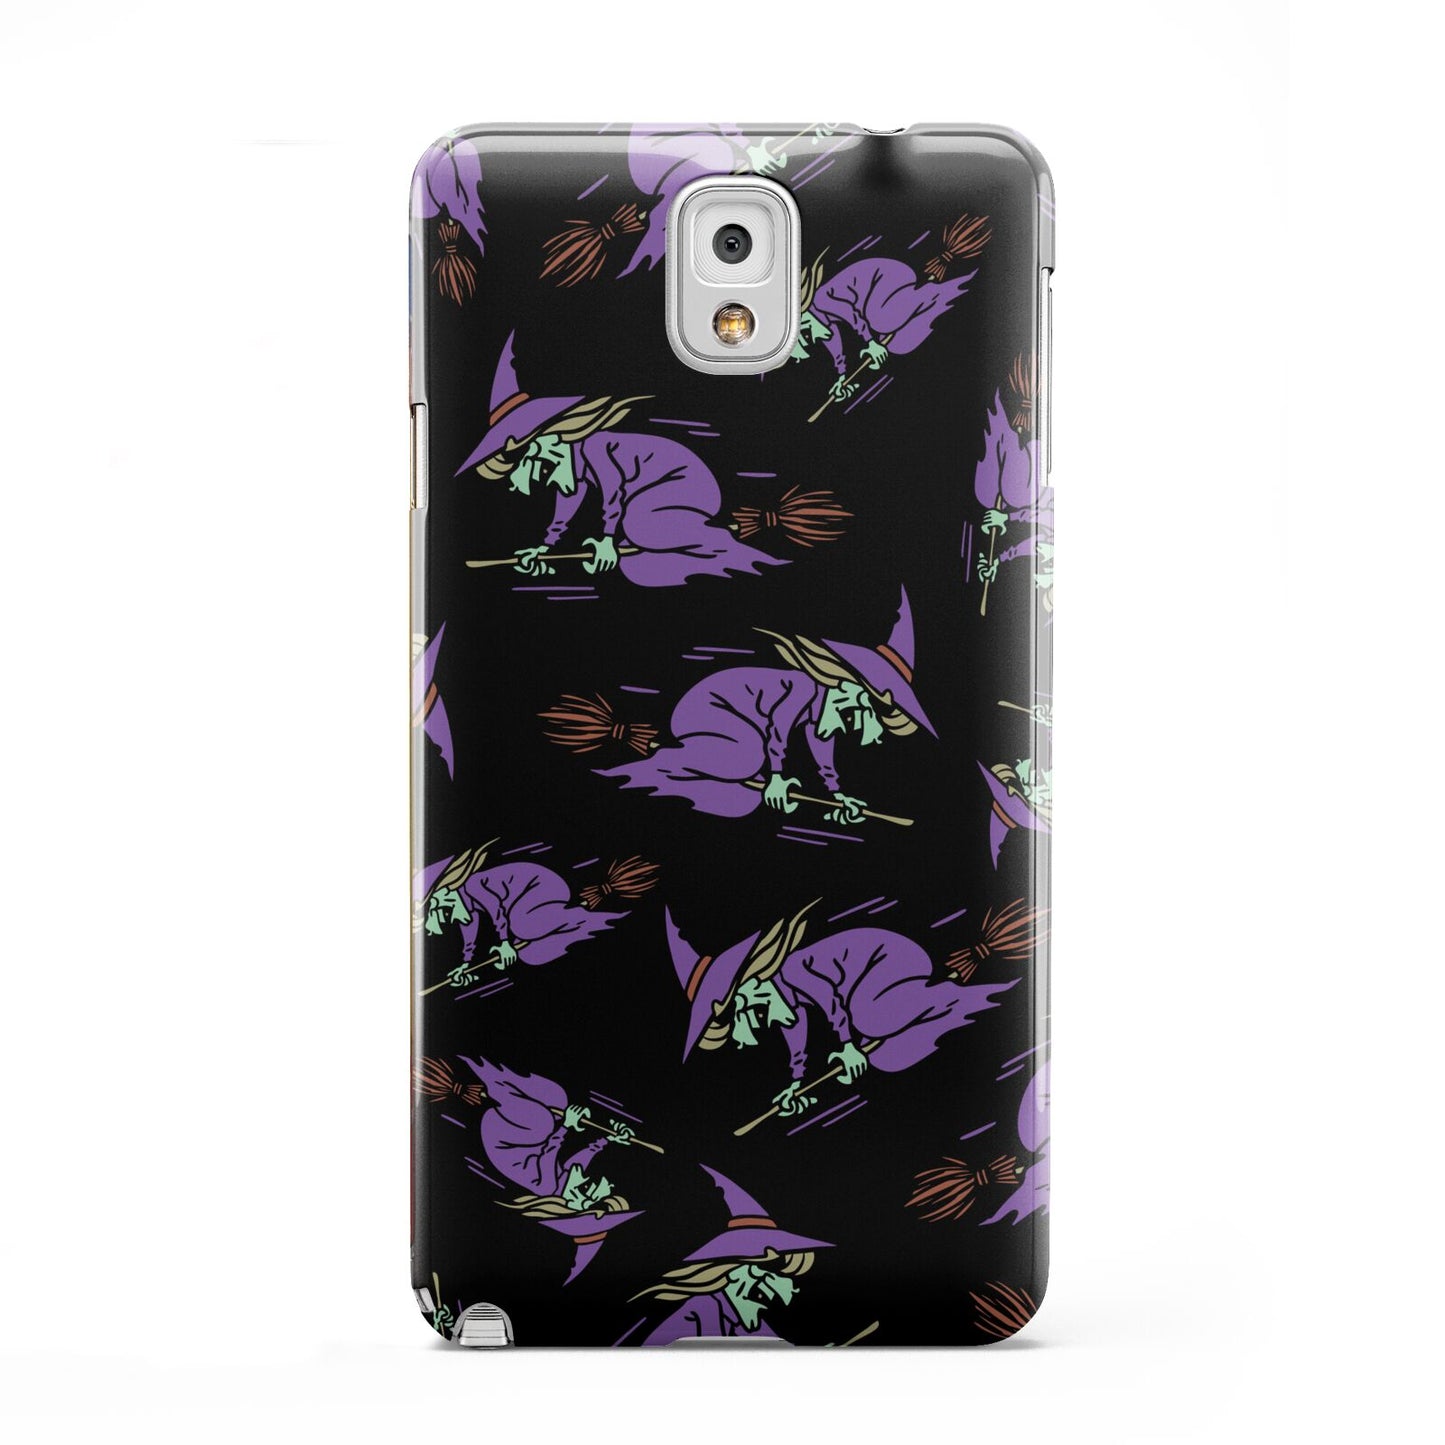 Flying Witches Samsung Galaxy Note 3 Case